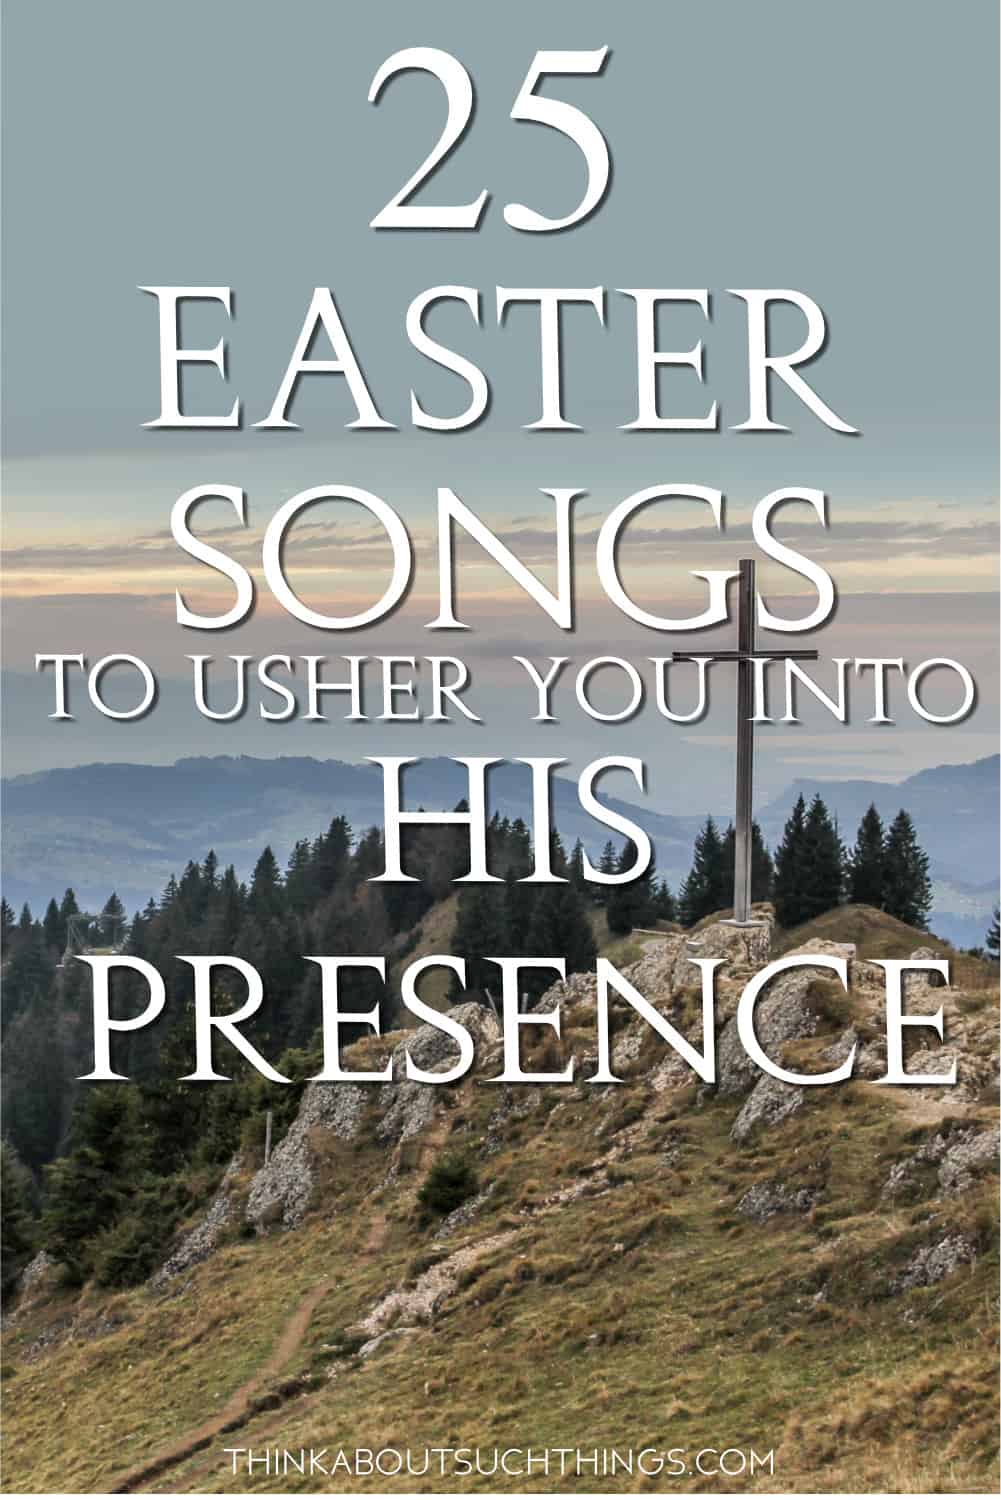 25 Easter Songs For A Powerful Worship Service Think About Such Things